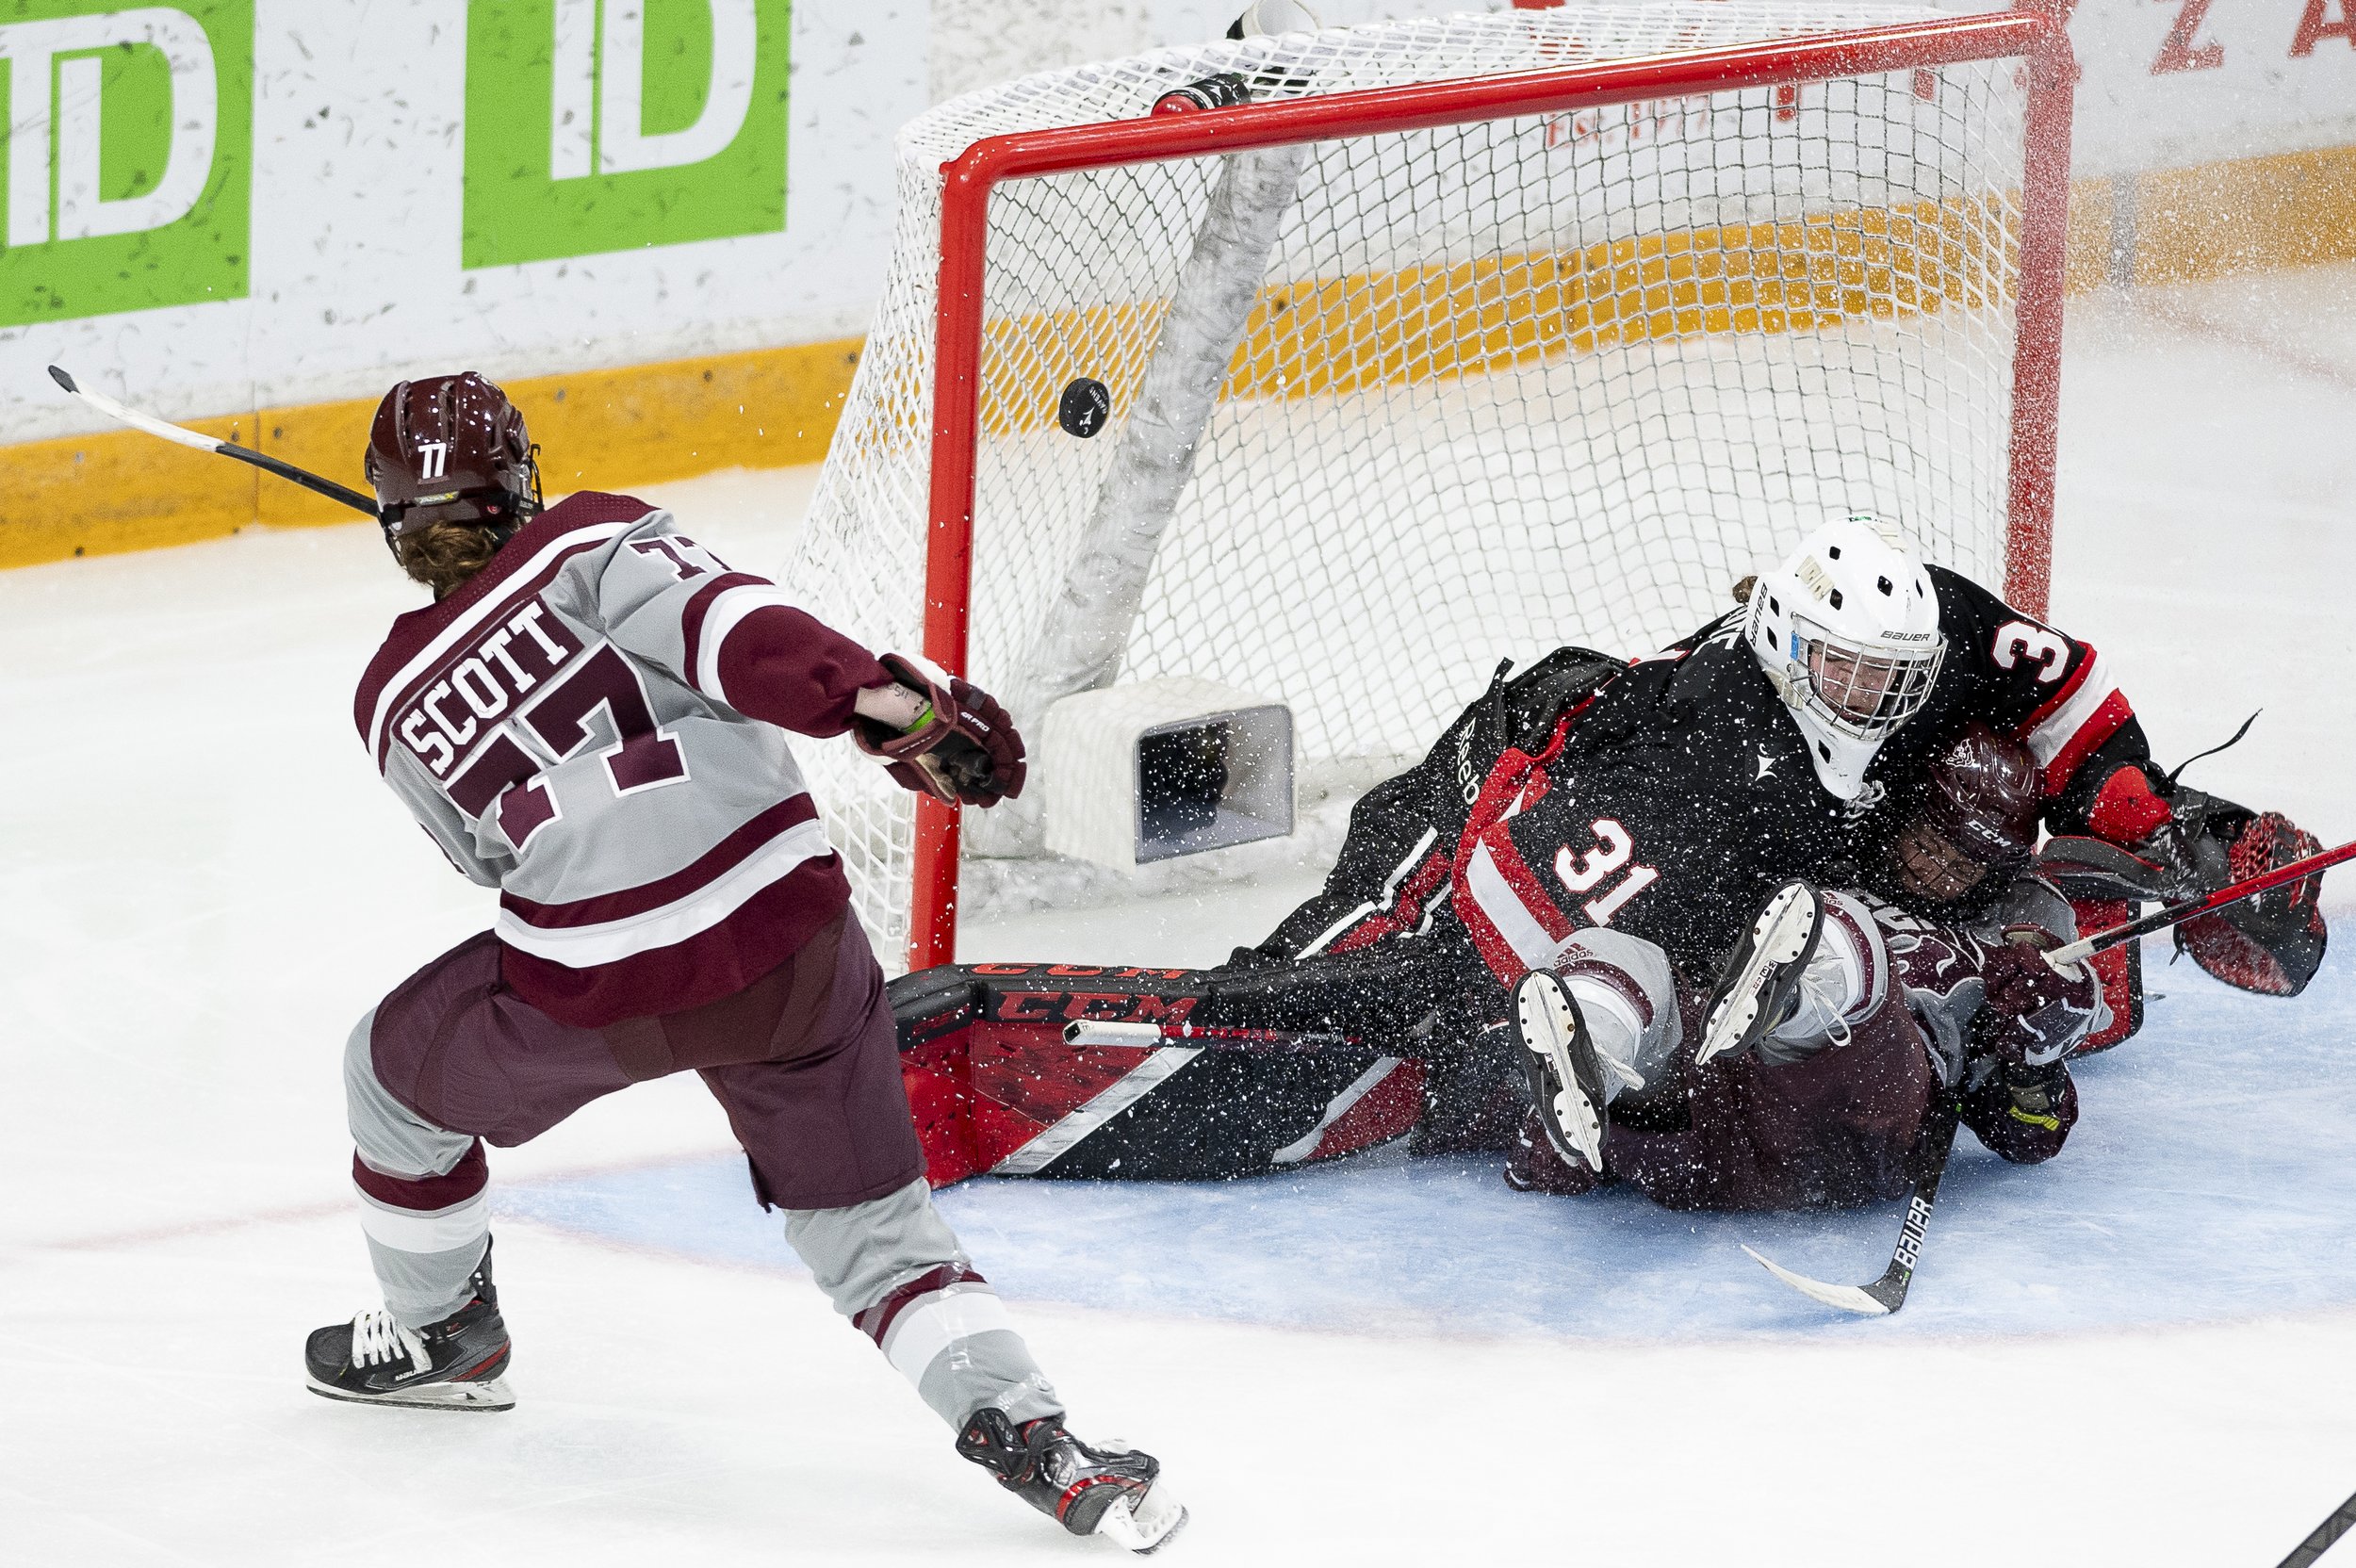  uOttawa Gee-Gees forward Taylor Scott (77) attempts a shot on net as a uOttawa Gee-Gees player crashes into Carleton Ravens goaltender Marie-eve Cote (31) during the Alerts Cup matchup in Ottawa, on Sunday, Jan. 22, 2023. Spencer Colby/The Charlatan